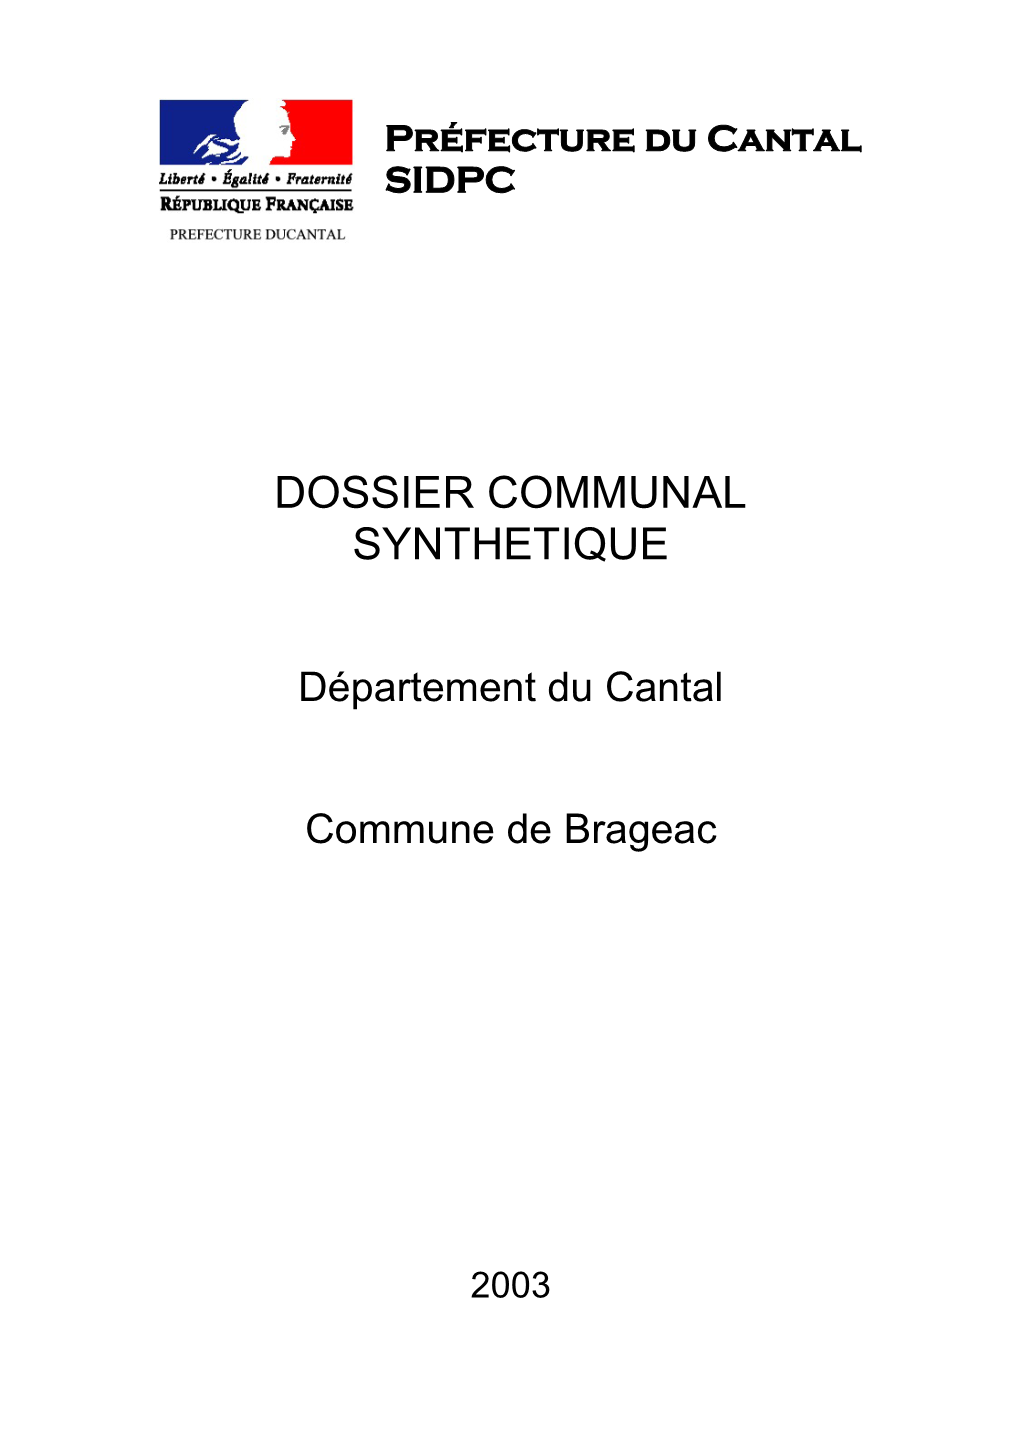 Dossier Communal Synthetique